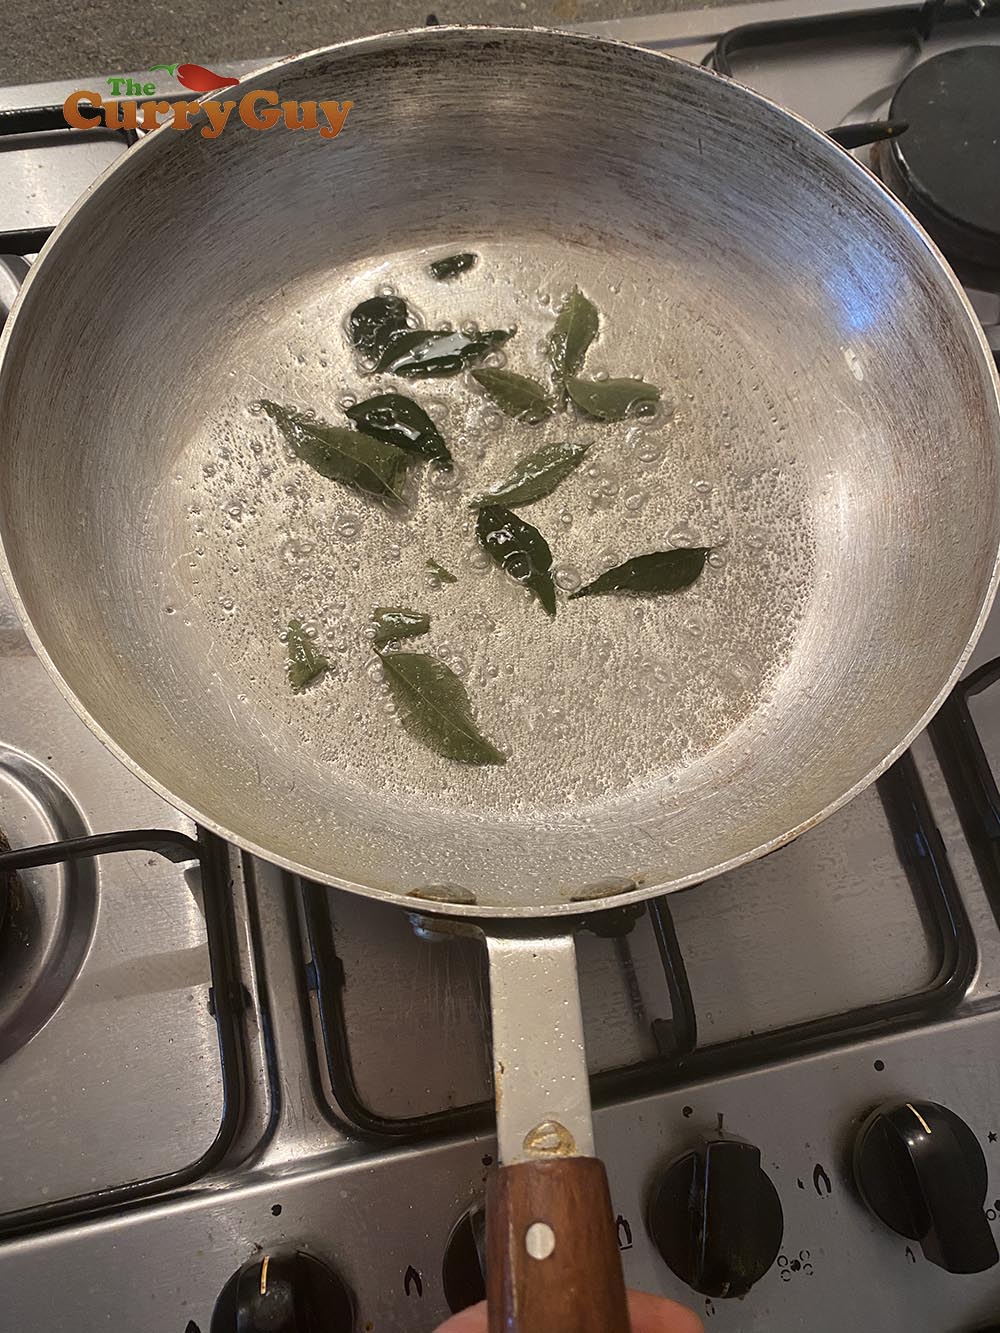 Infusing curry leaves in oil